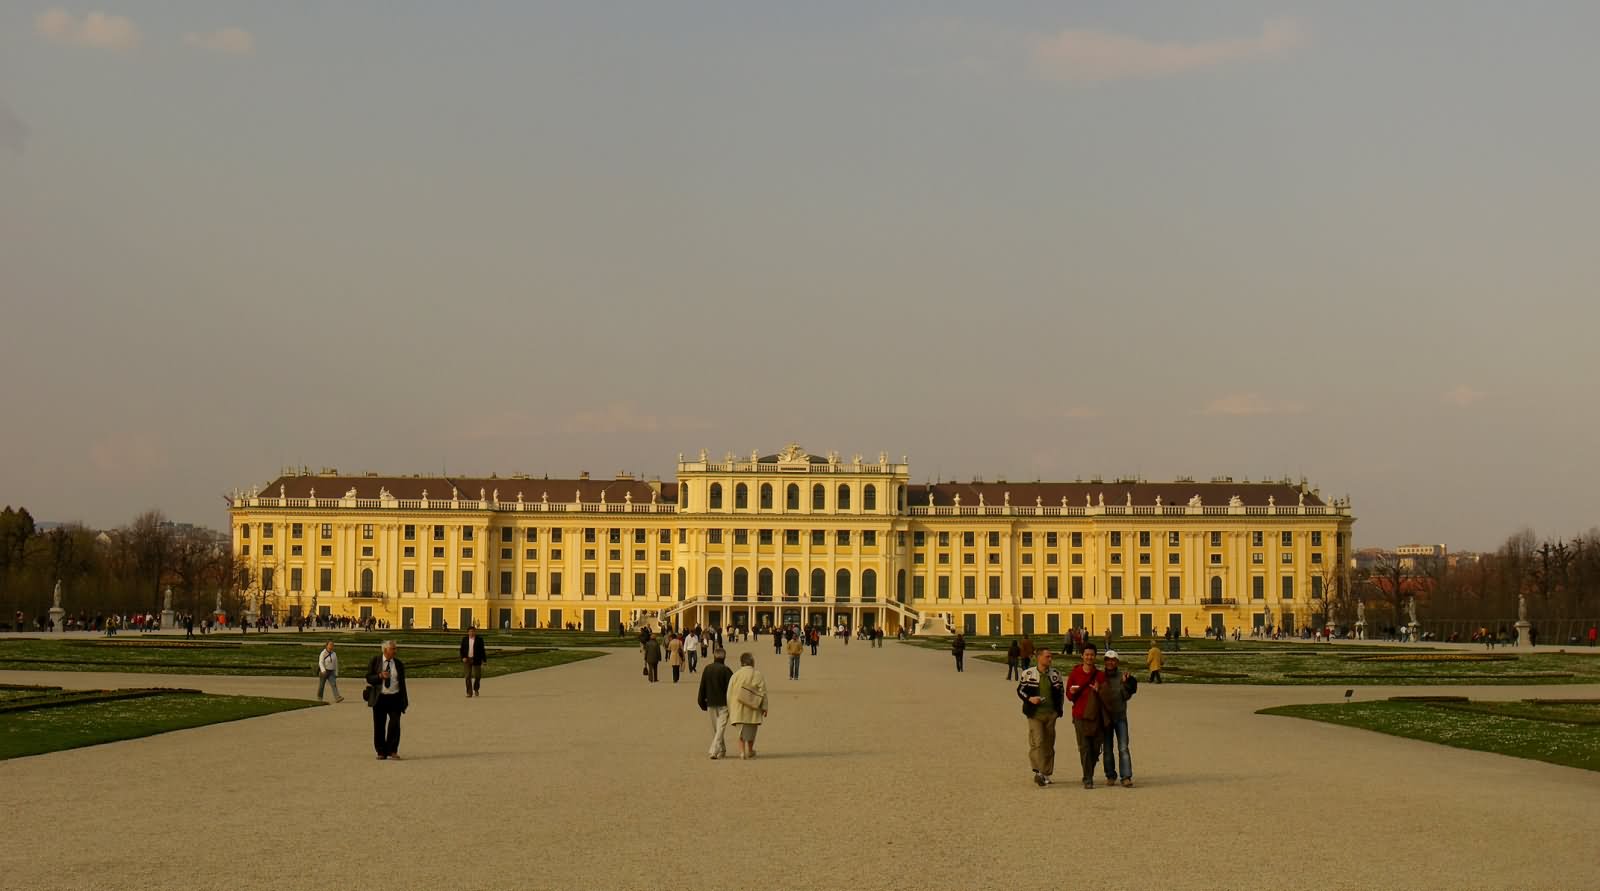 Front Entrance Of The Schonbrunn Palace In Vienna, Austria